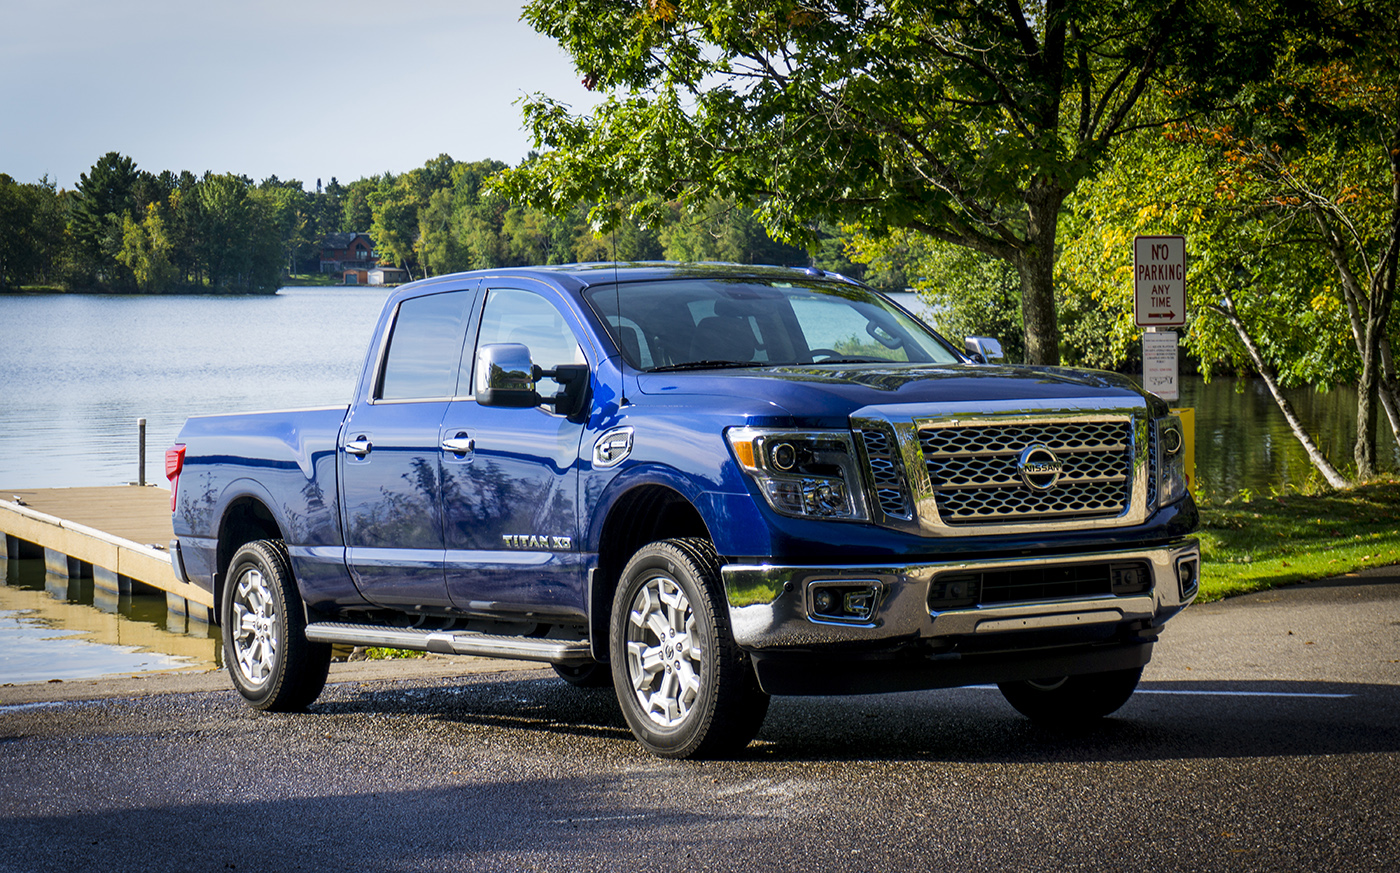 2016 Nissan Titan XD Crew Cab: In search of the Mighty Muskellunge